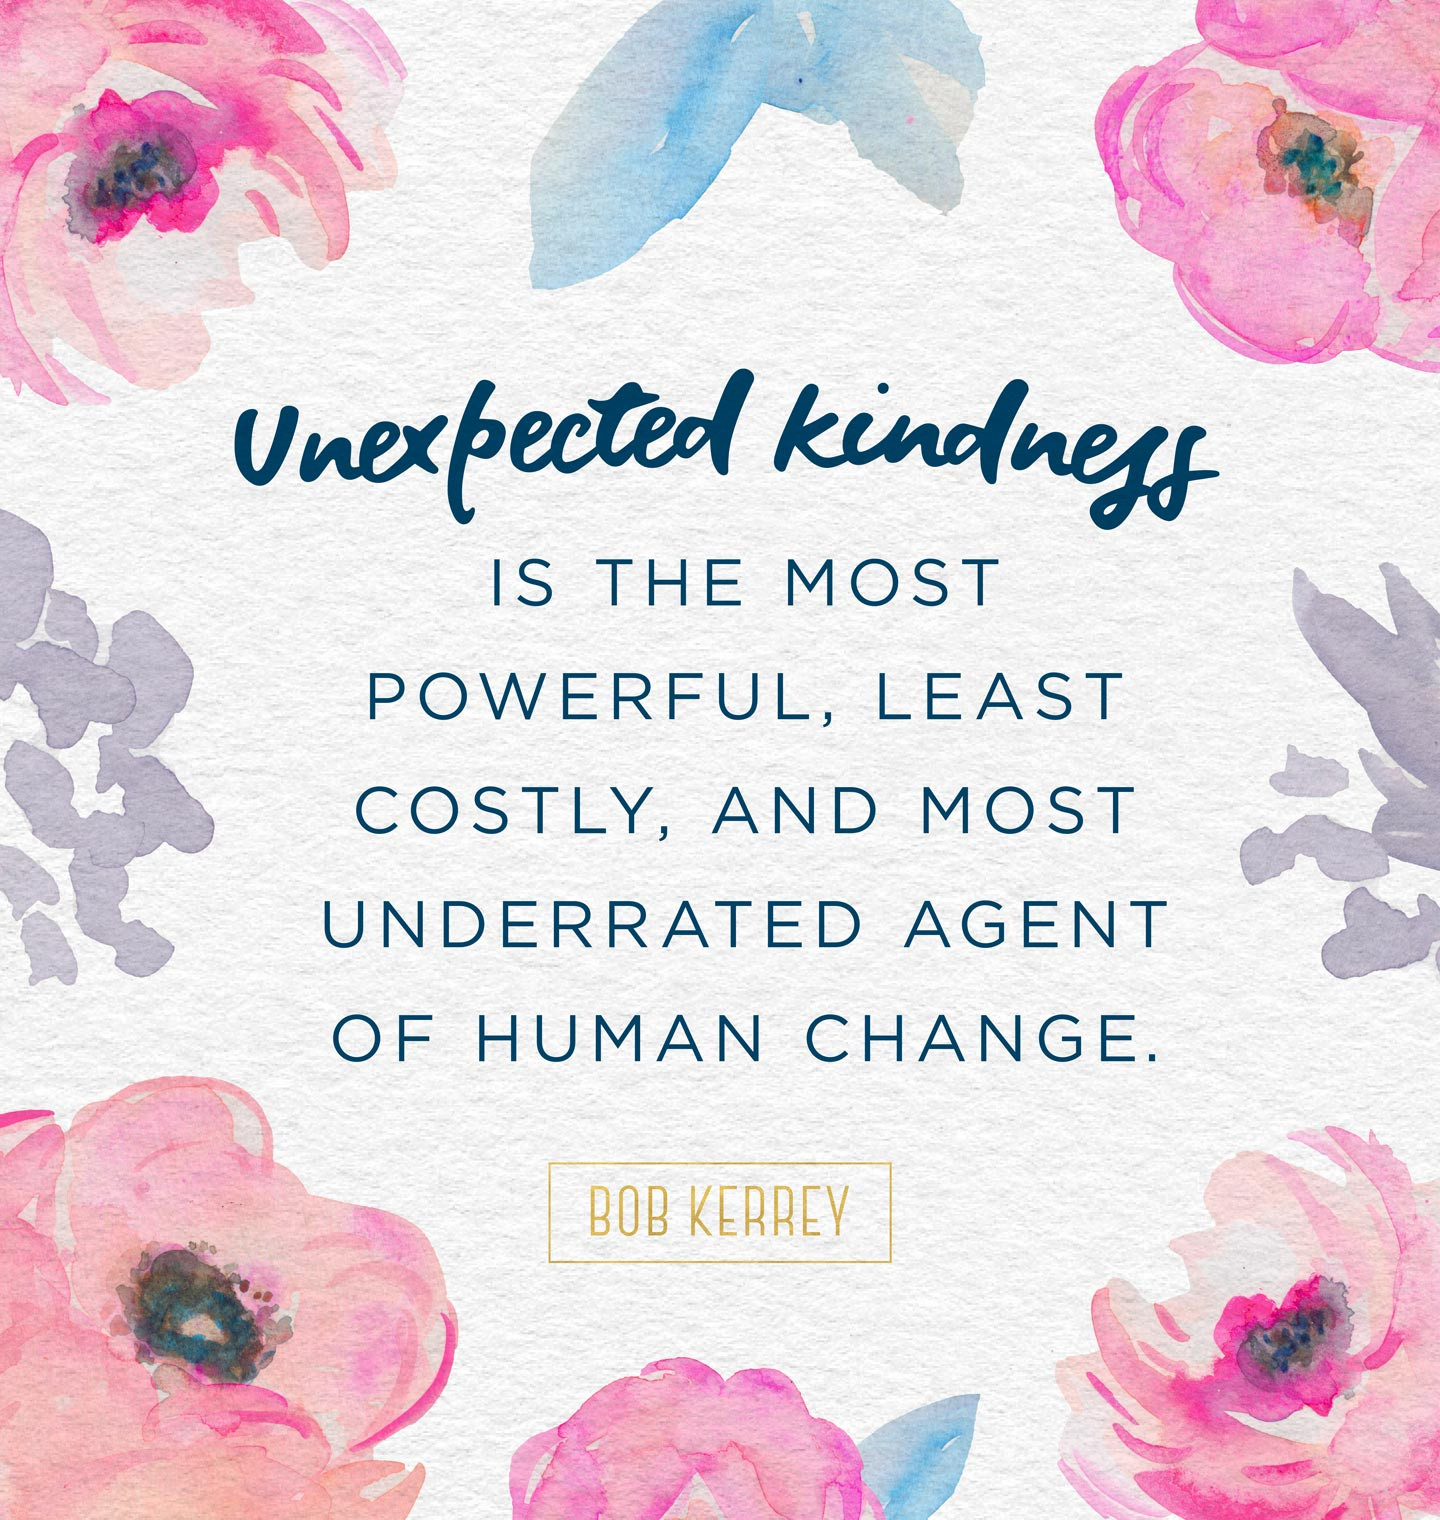 Human Kindness Quotes
 30 Inspiring Kindness Quotes That Will Enlighten You FTD